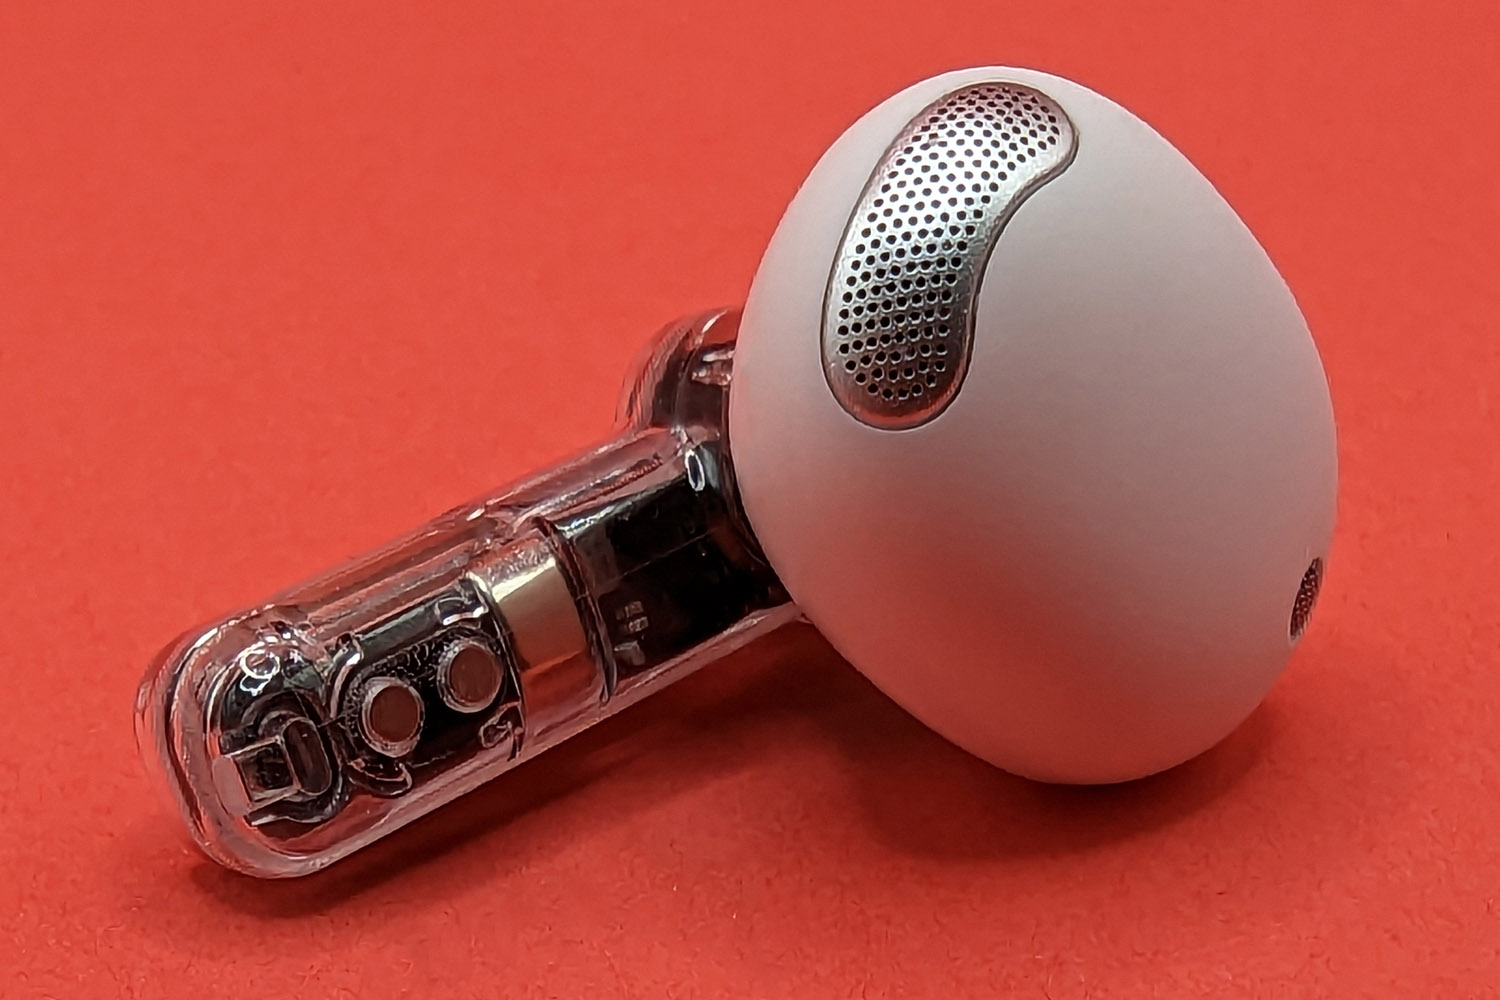 Nothing Ear (Stick) Review: Despite One Major Flaw, The Answer Is